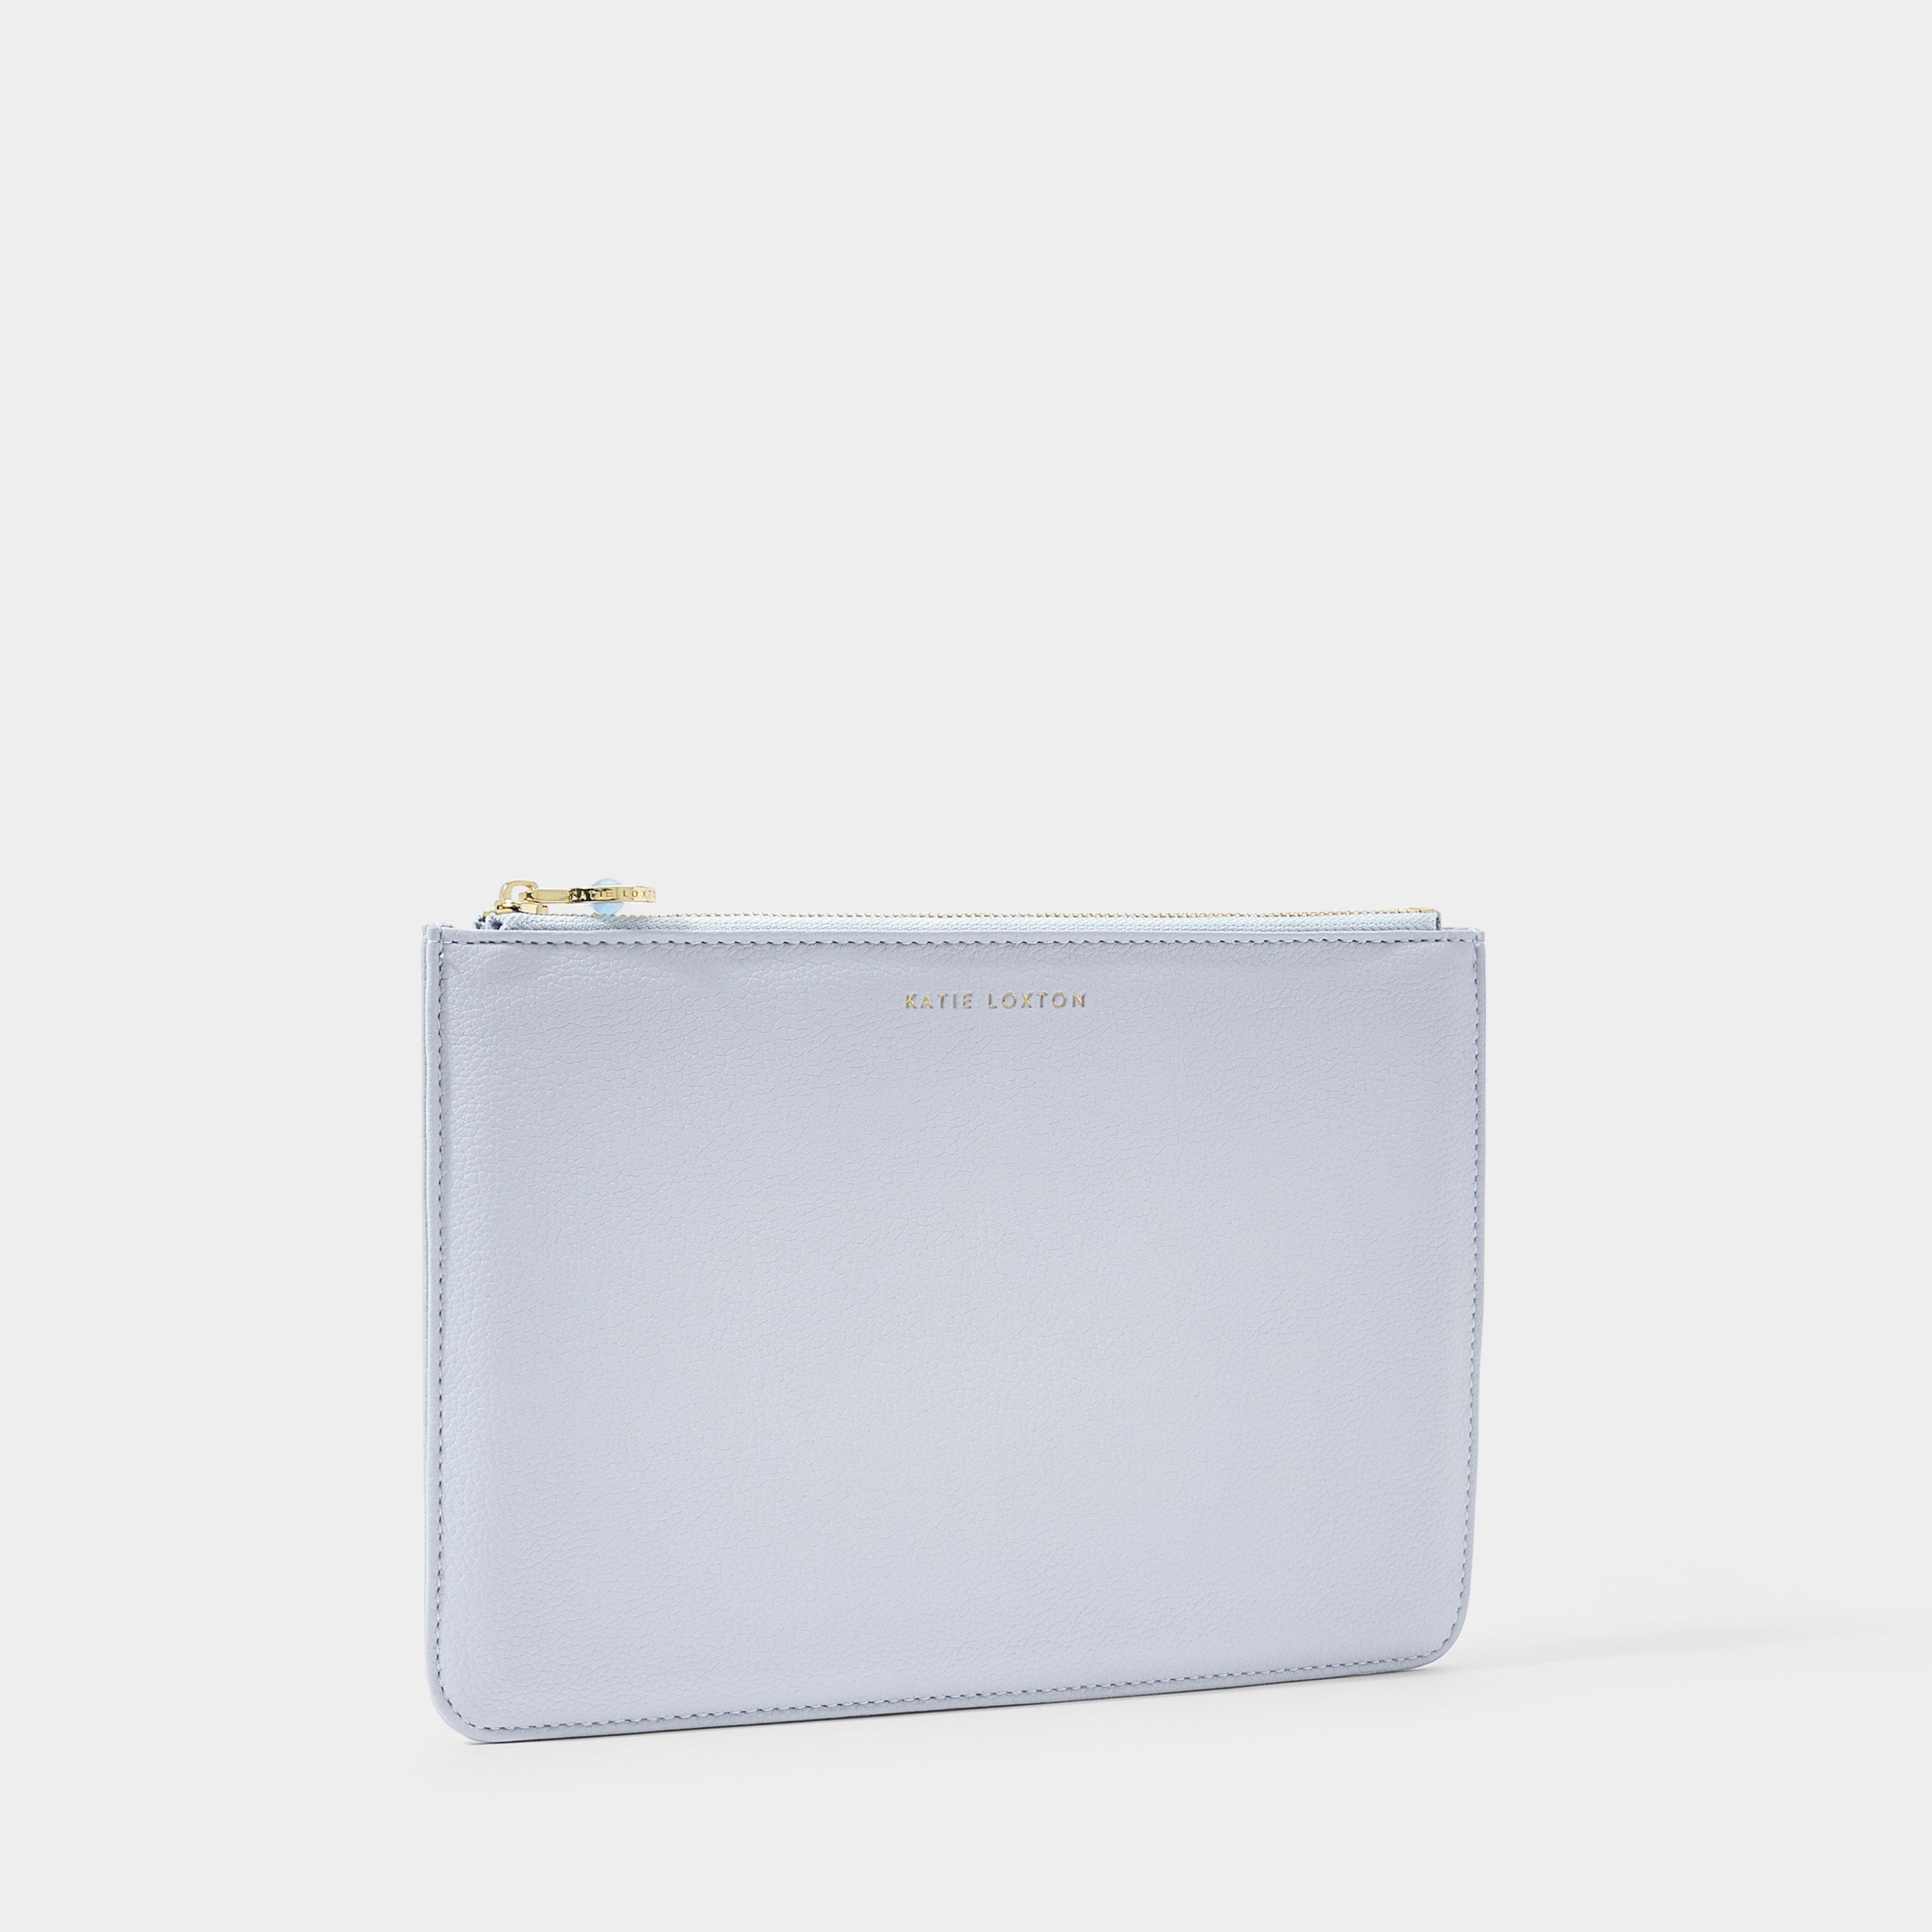 Katie Loxton Secret Message Pouch Katie Loxton Wellness Secret Message Pouch - It's A Lovely Day To Go After Your Dreams  - Light Blue